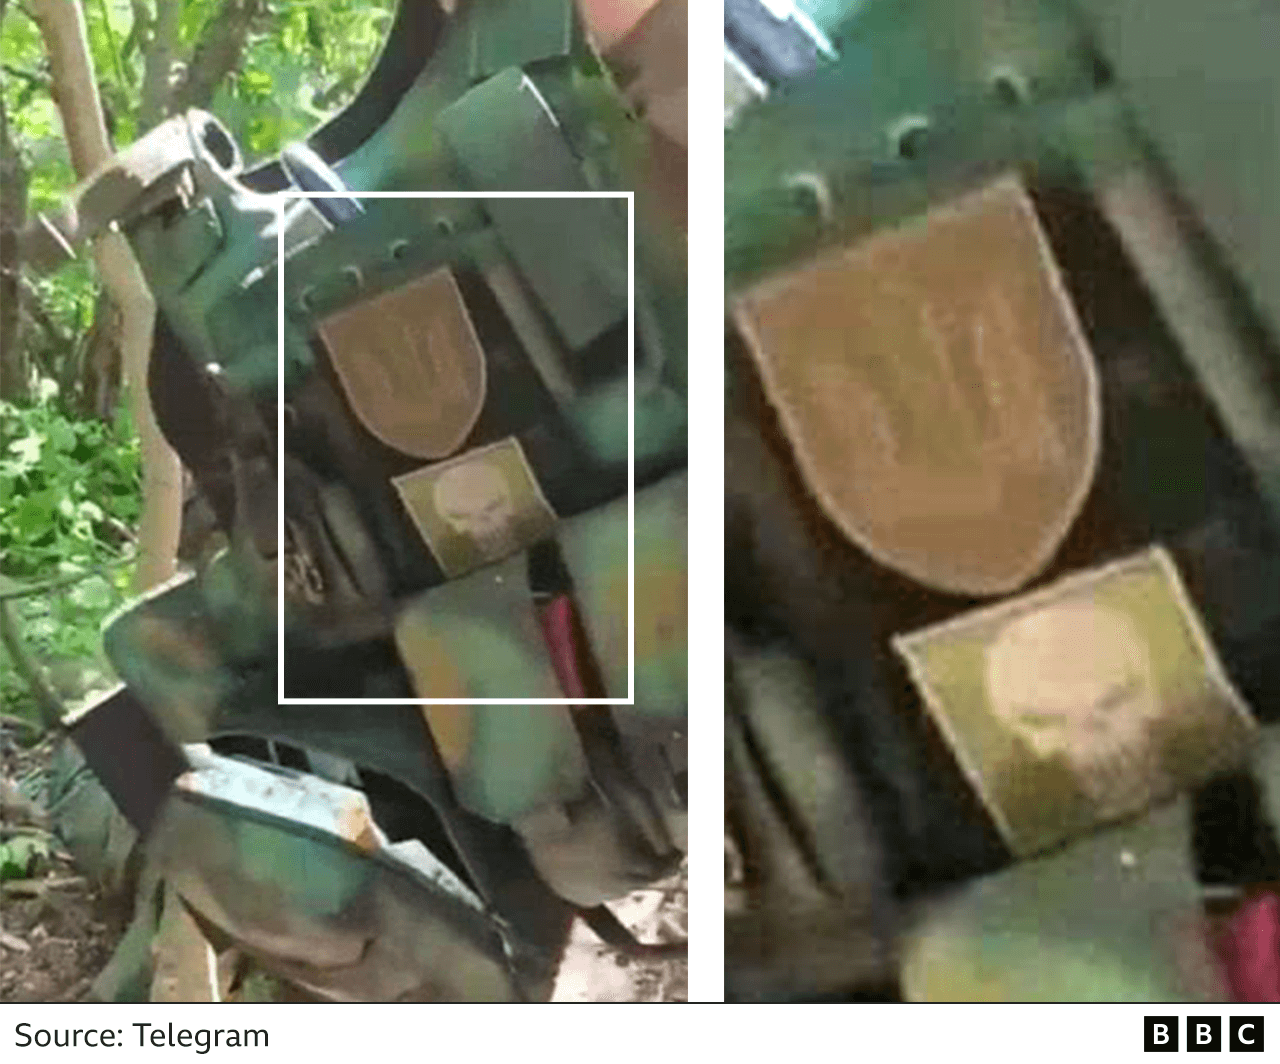 Video frame showing patches worn on a piece of body armour held up in front of the camera